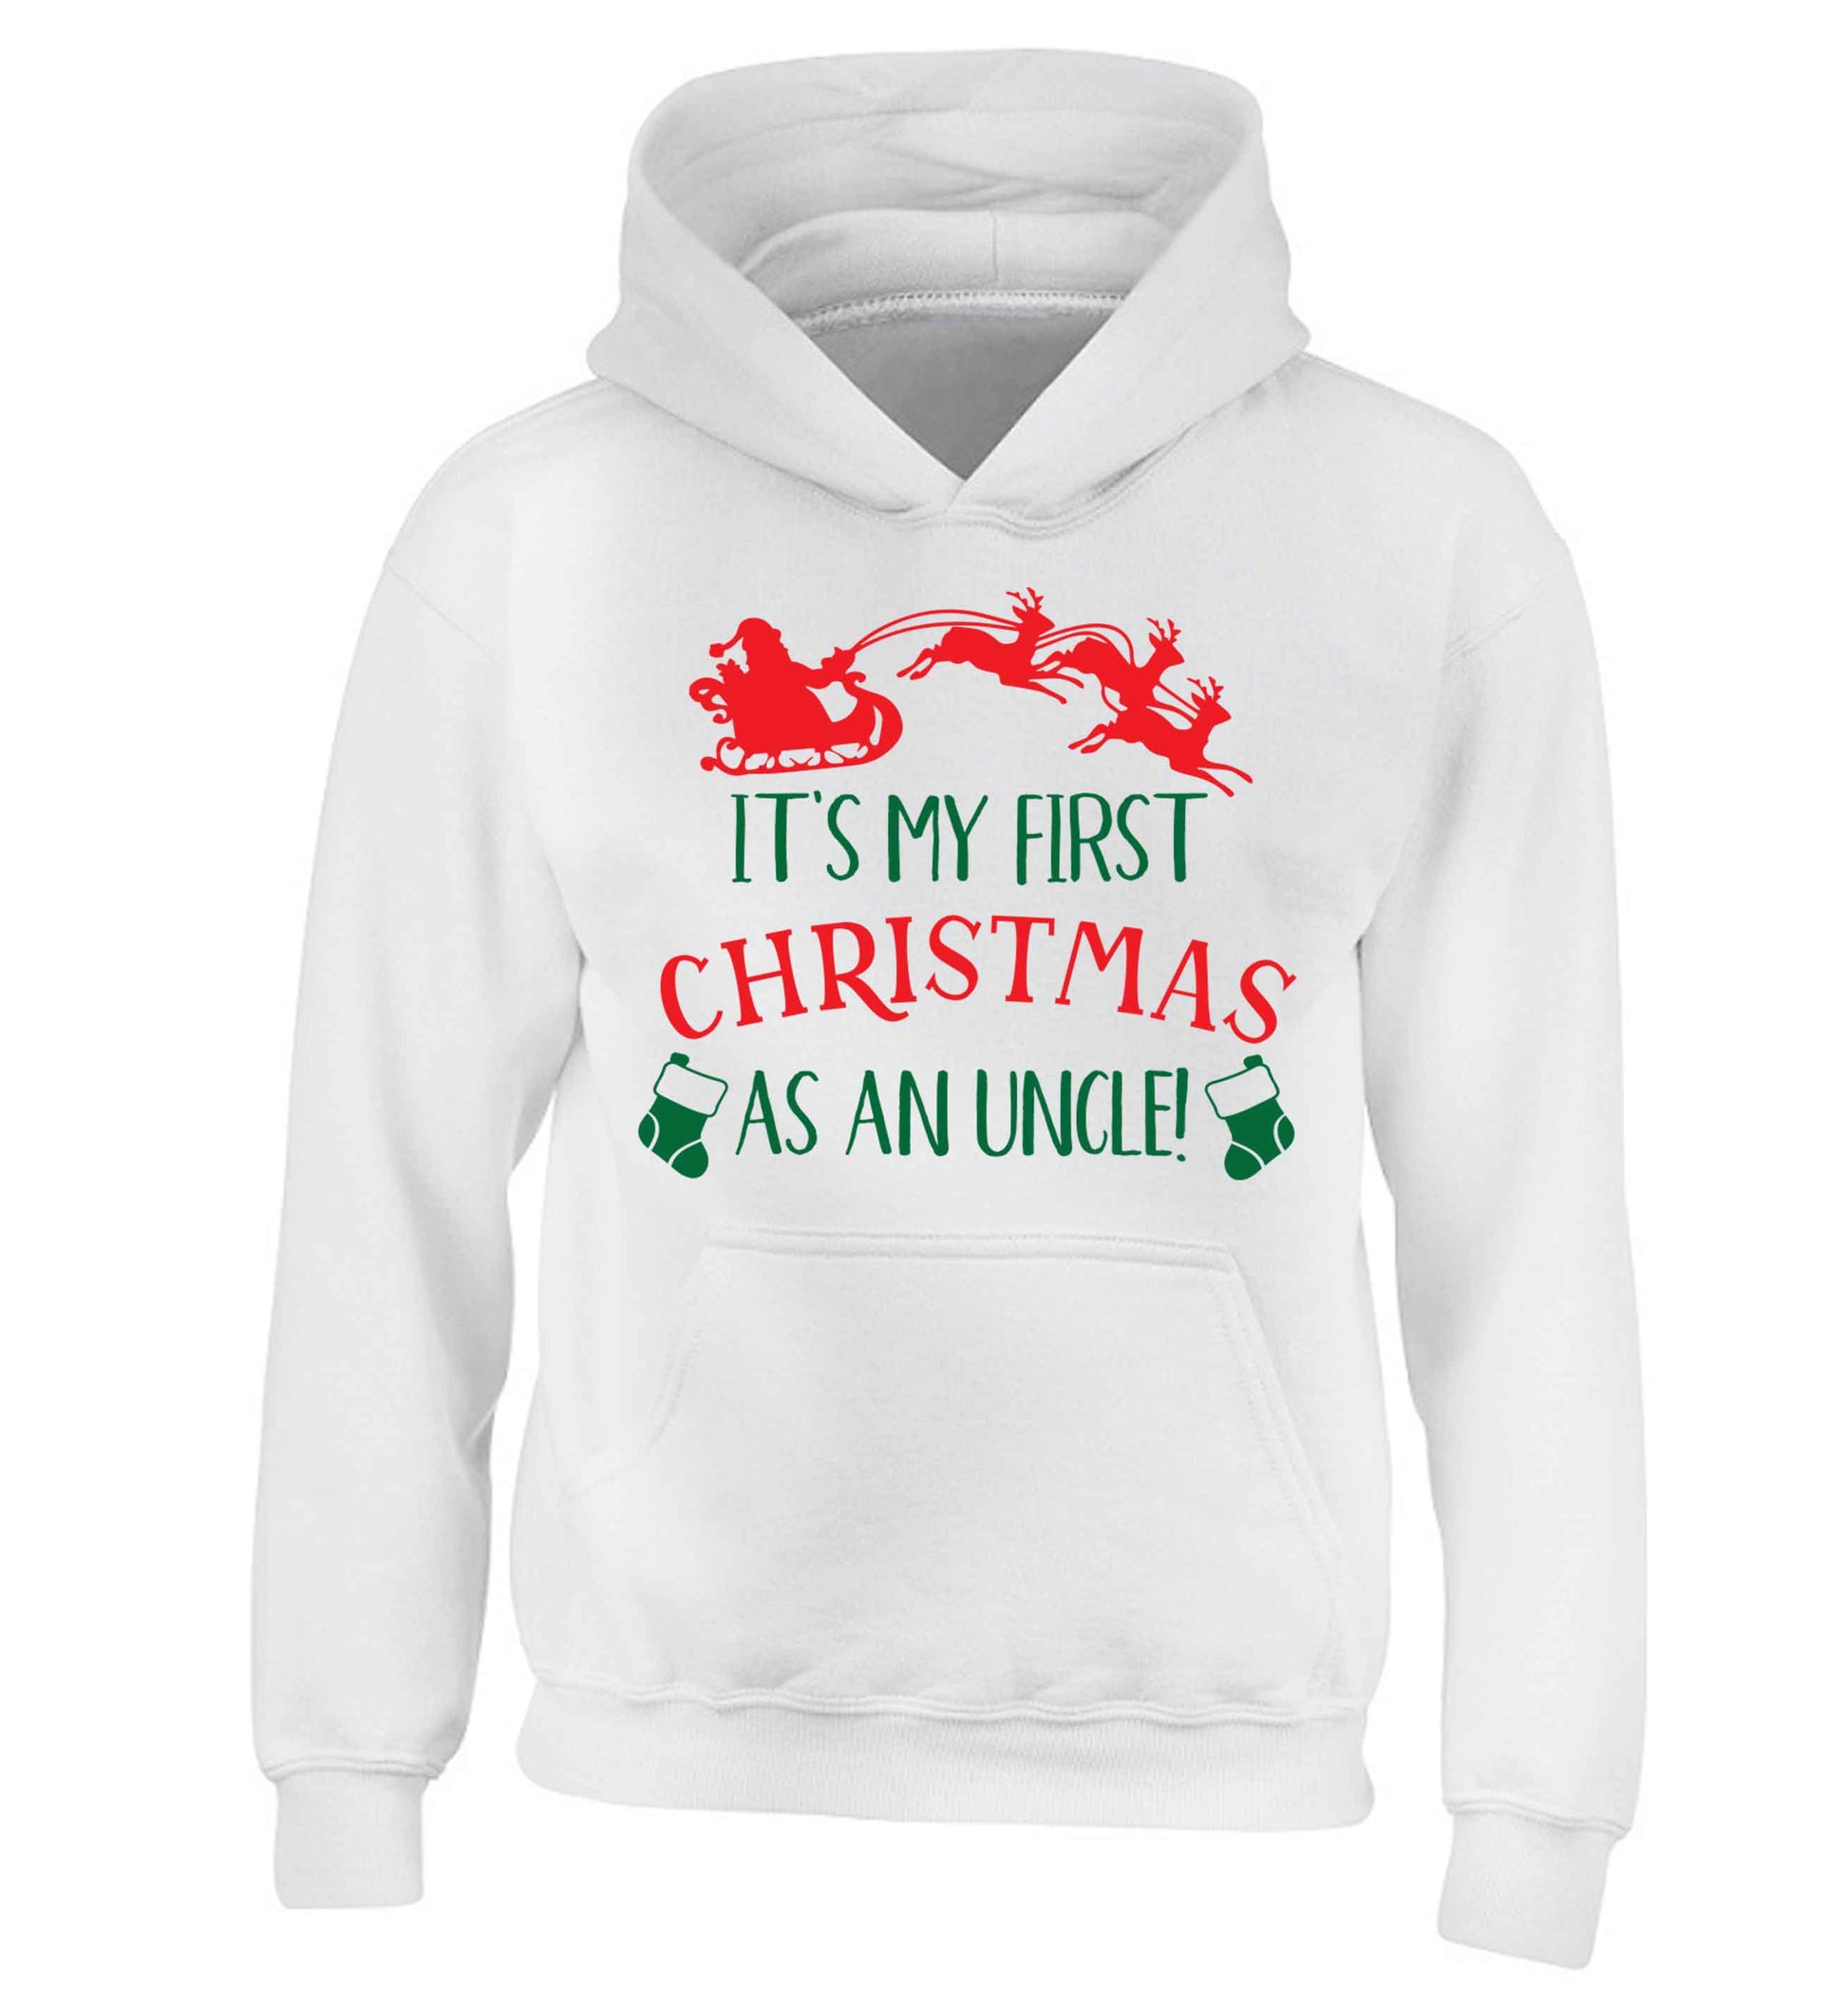 It's my first Christmas as an uncle! children's white hoodie 12-13 Years